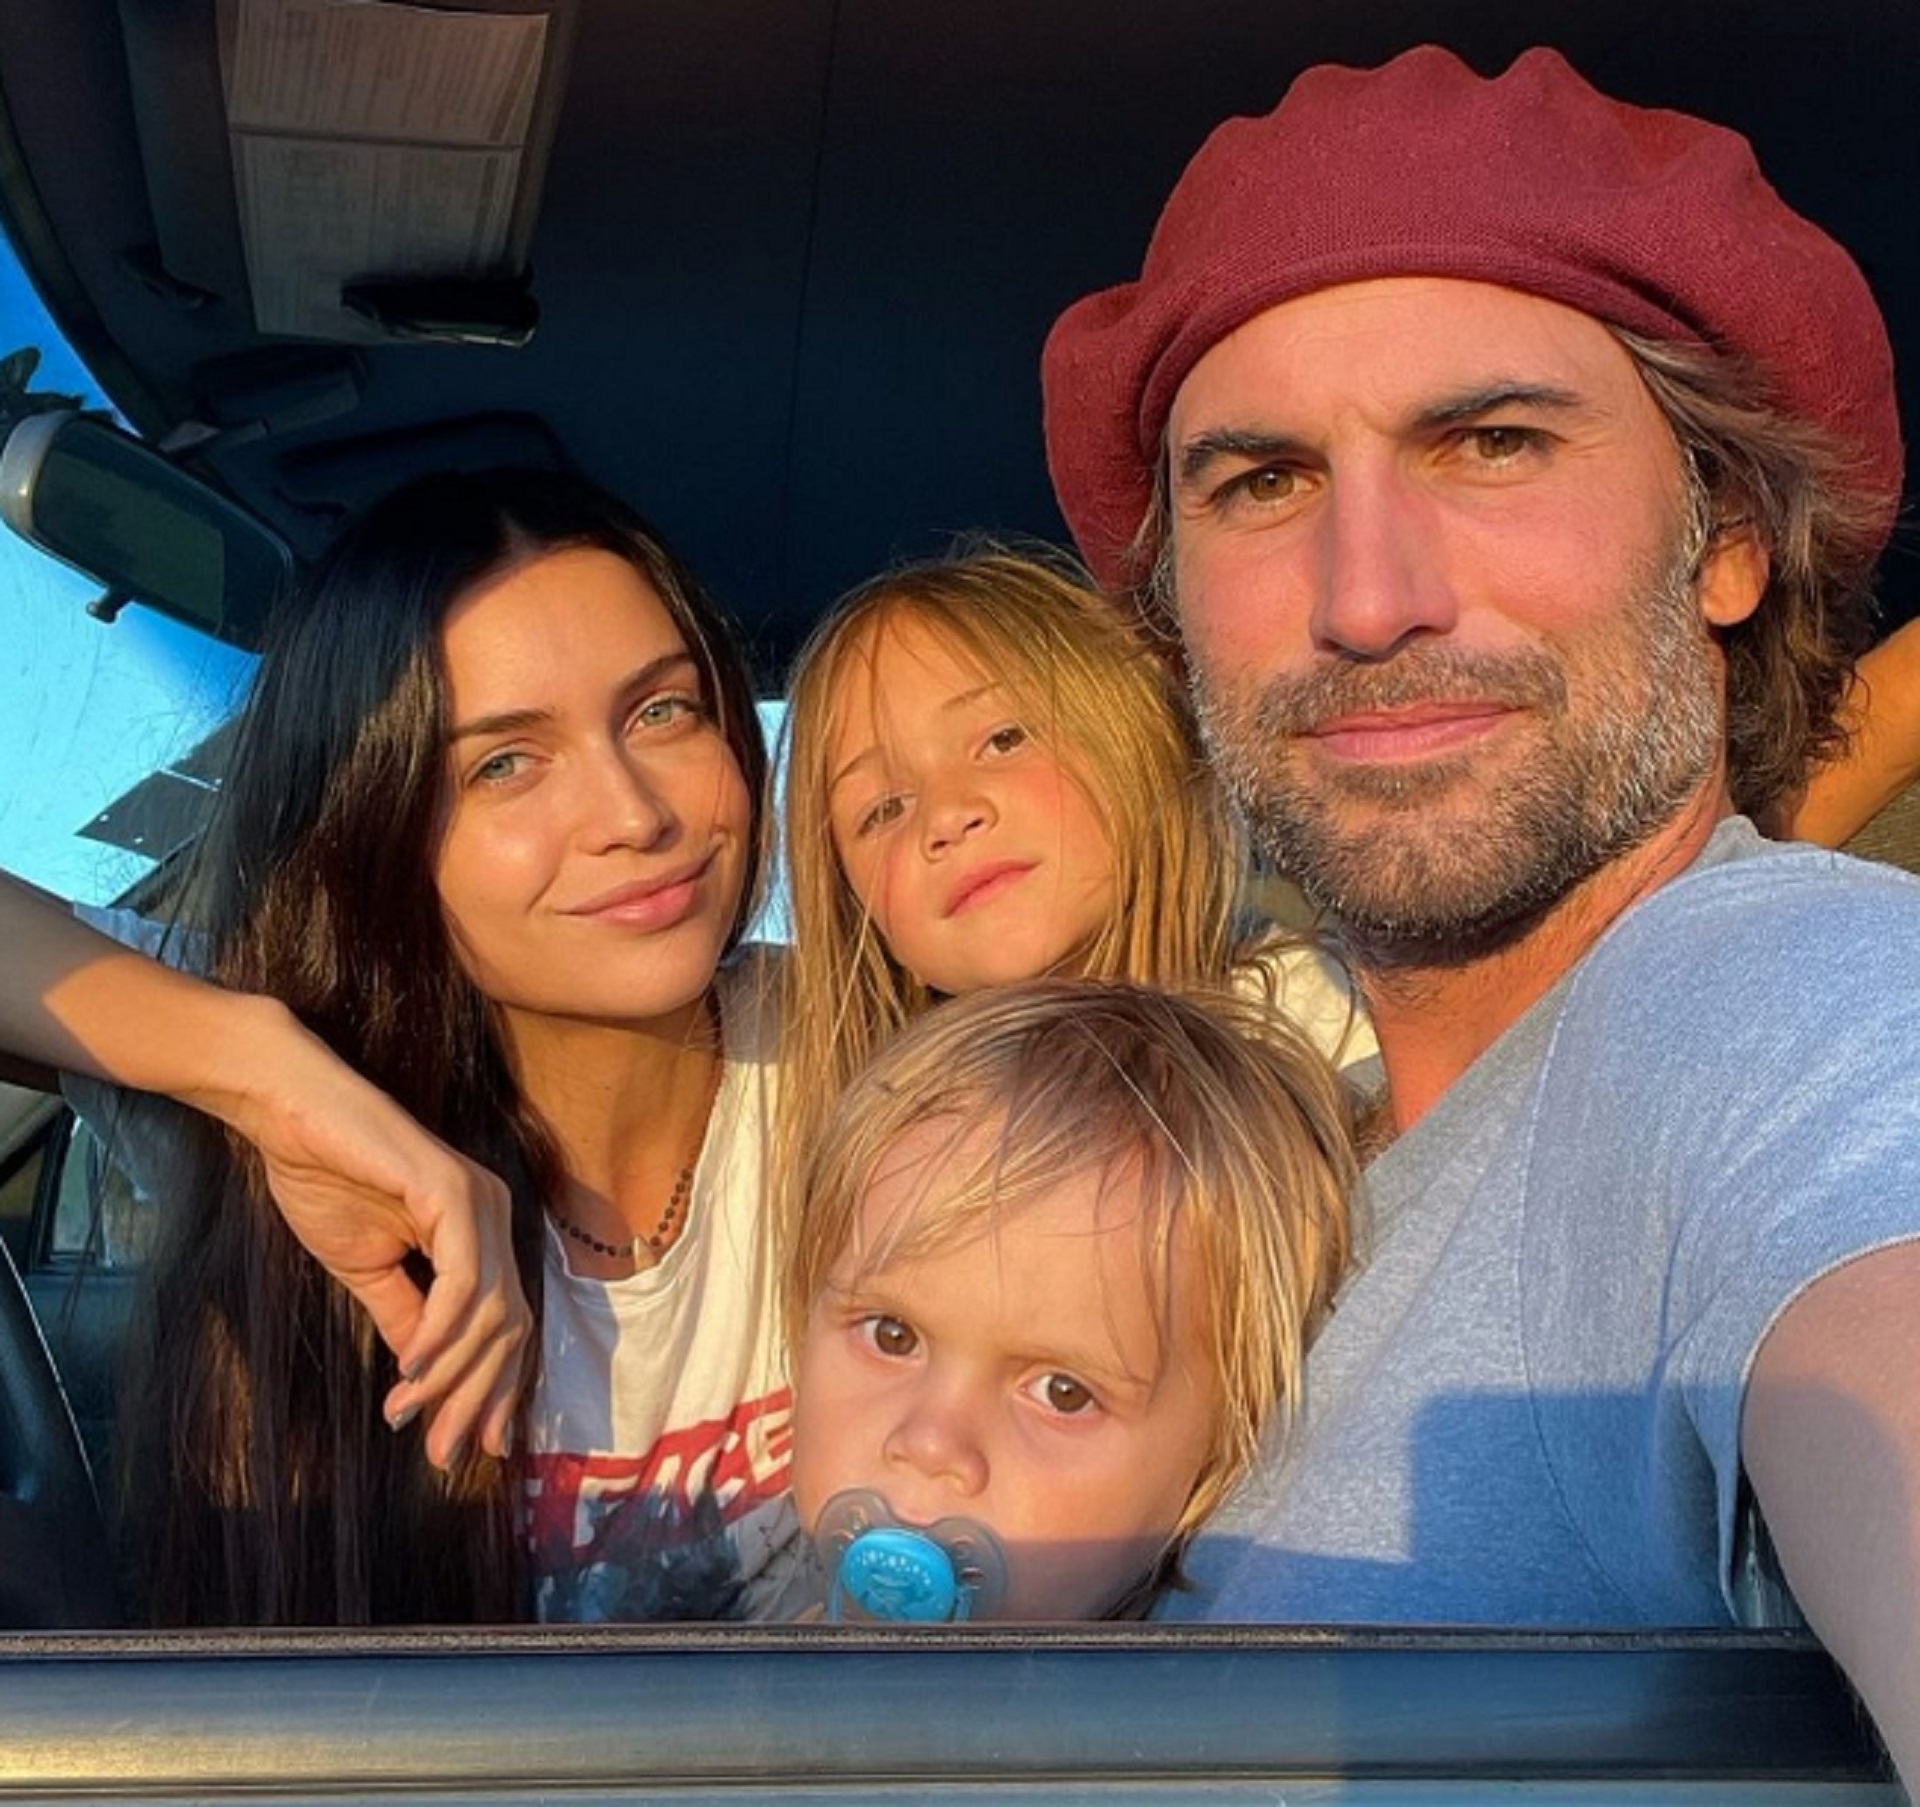 The selfie that Zaira Nara and Jakob von Plessen posted to deny their separation